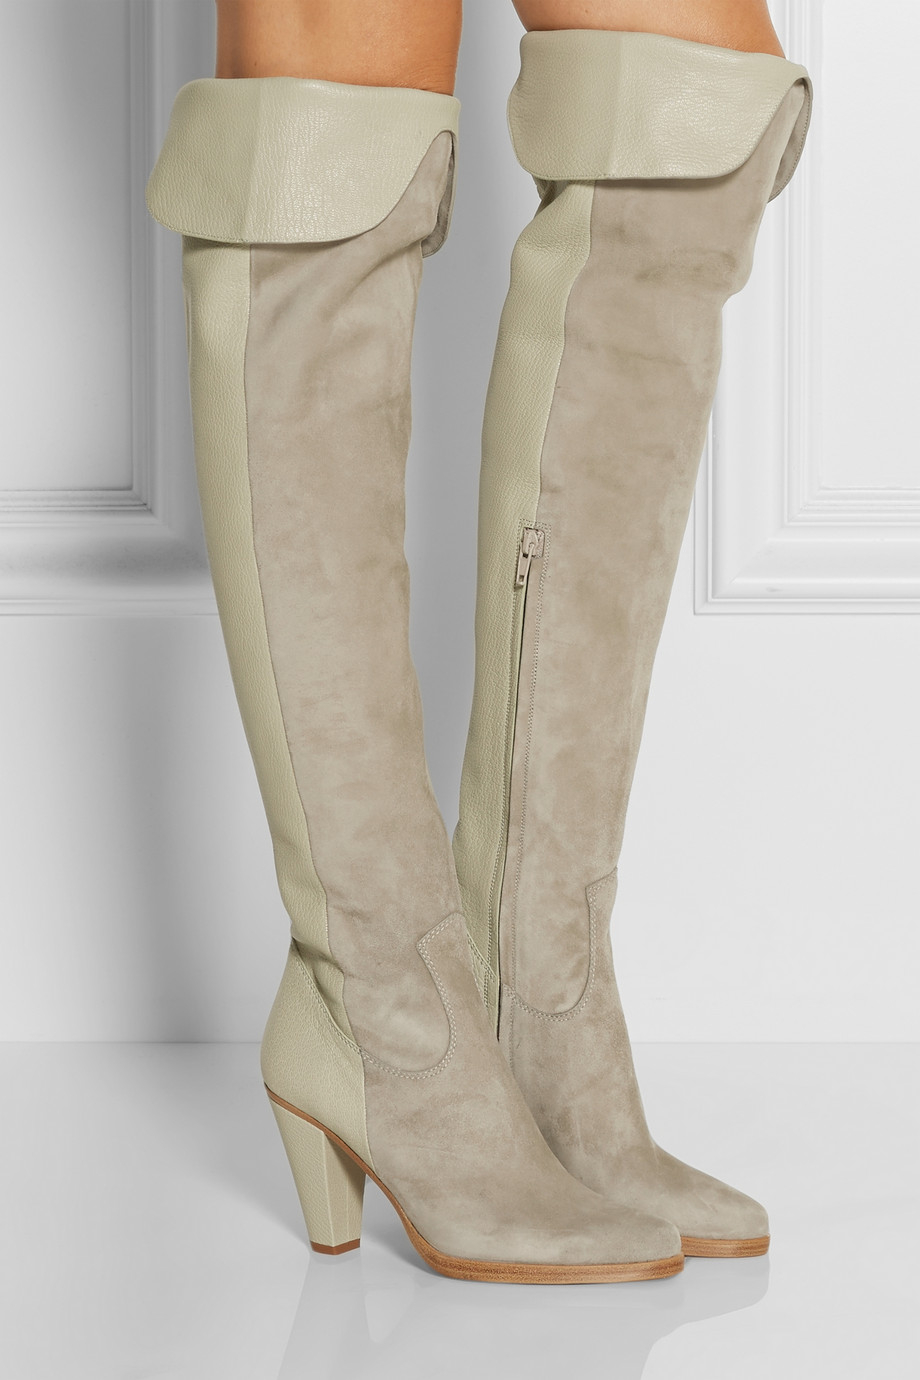 Chloé Suede And Textured-Leather Over-The-Knee Boots in Gray - Lyst